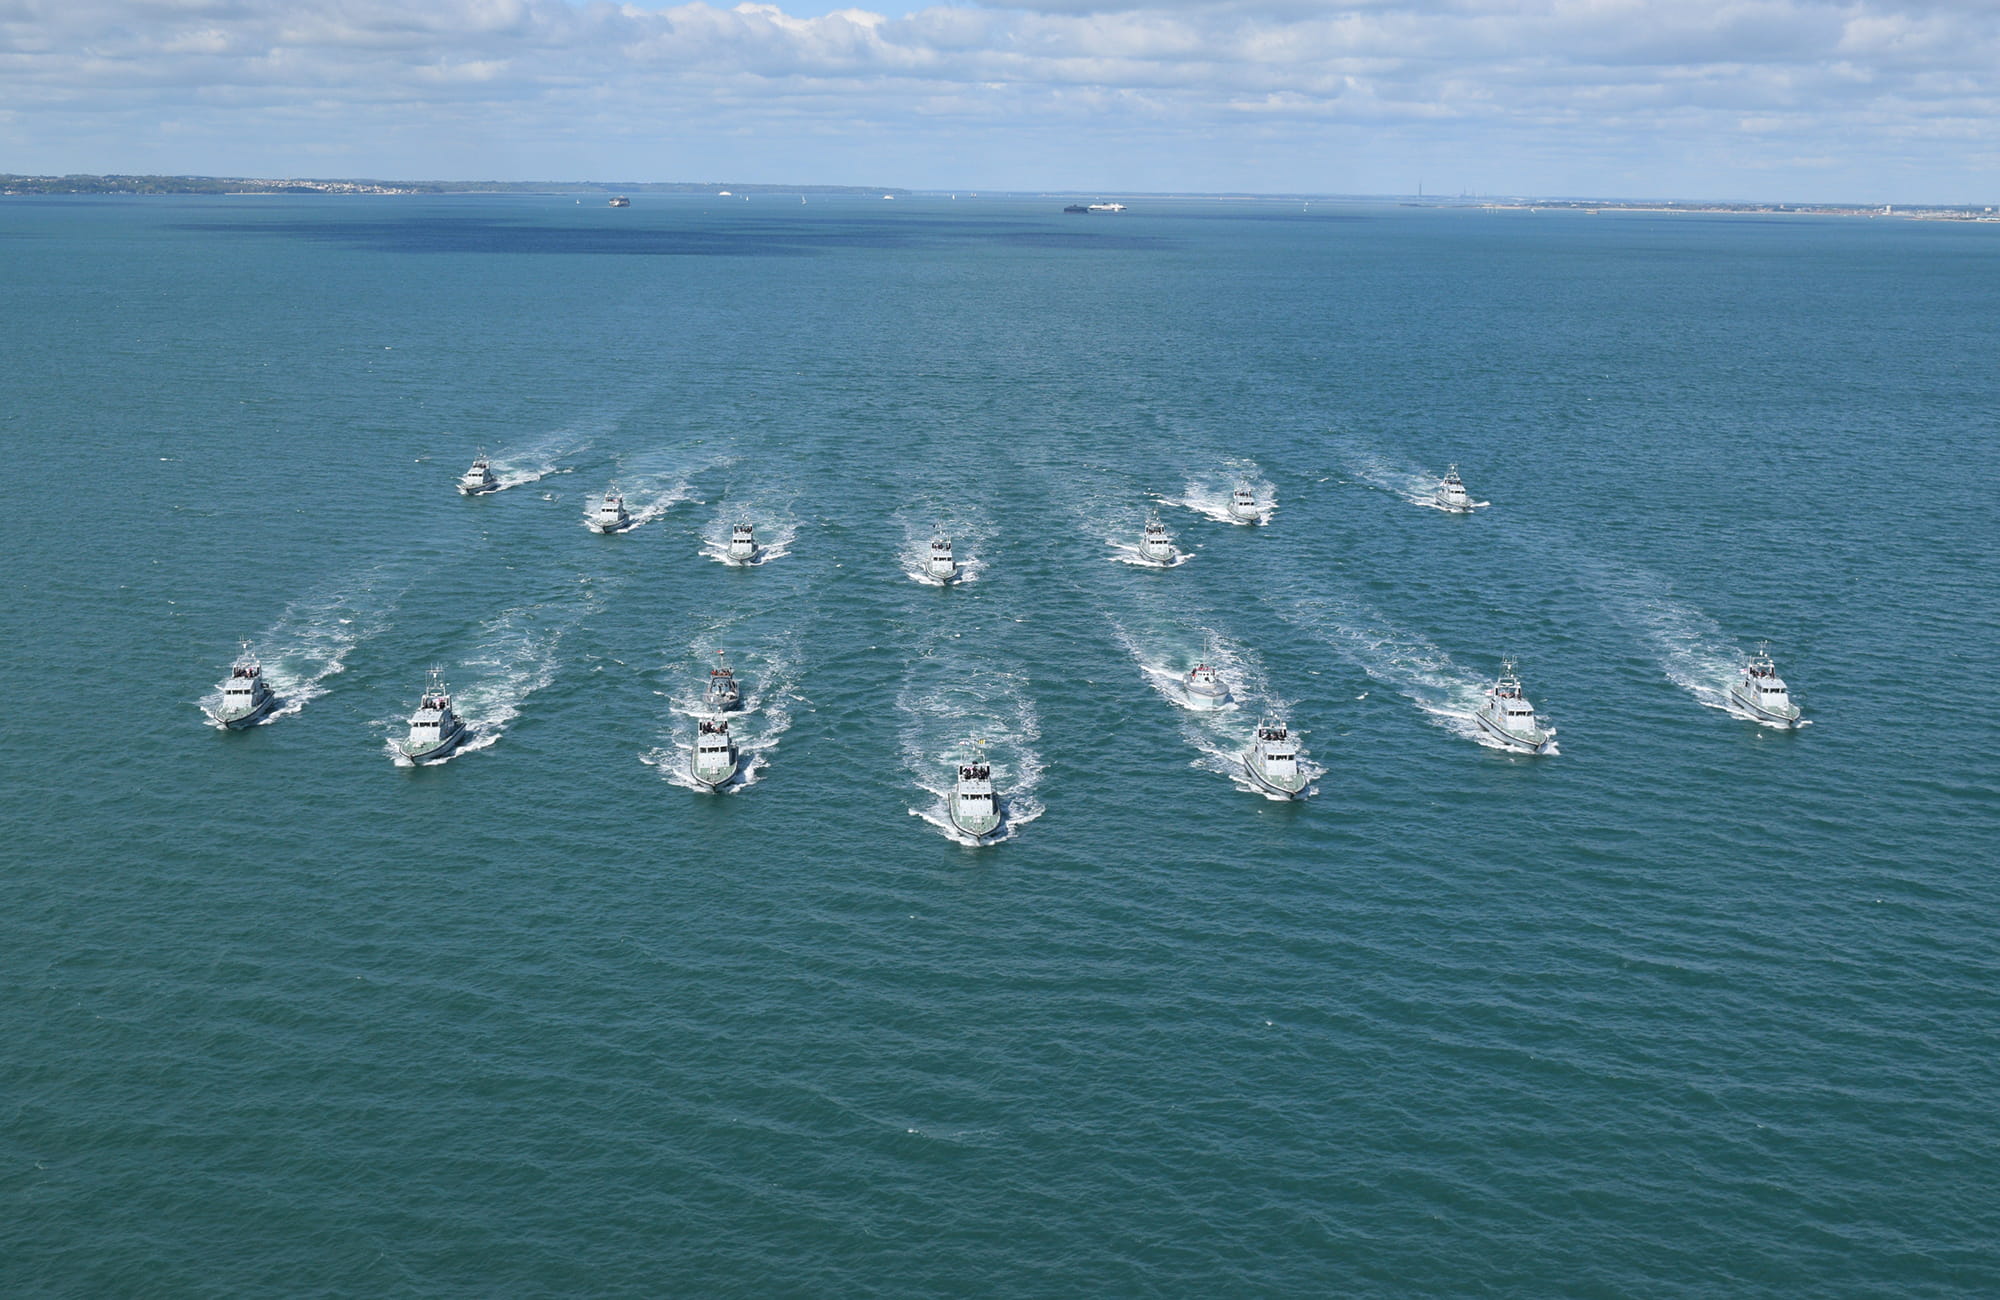 All Royal Navy Archer Class ships speed towards the camera